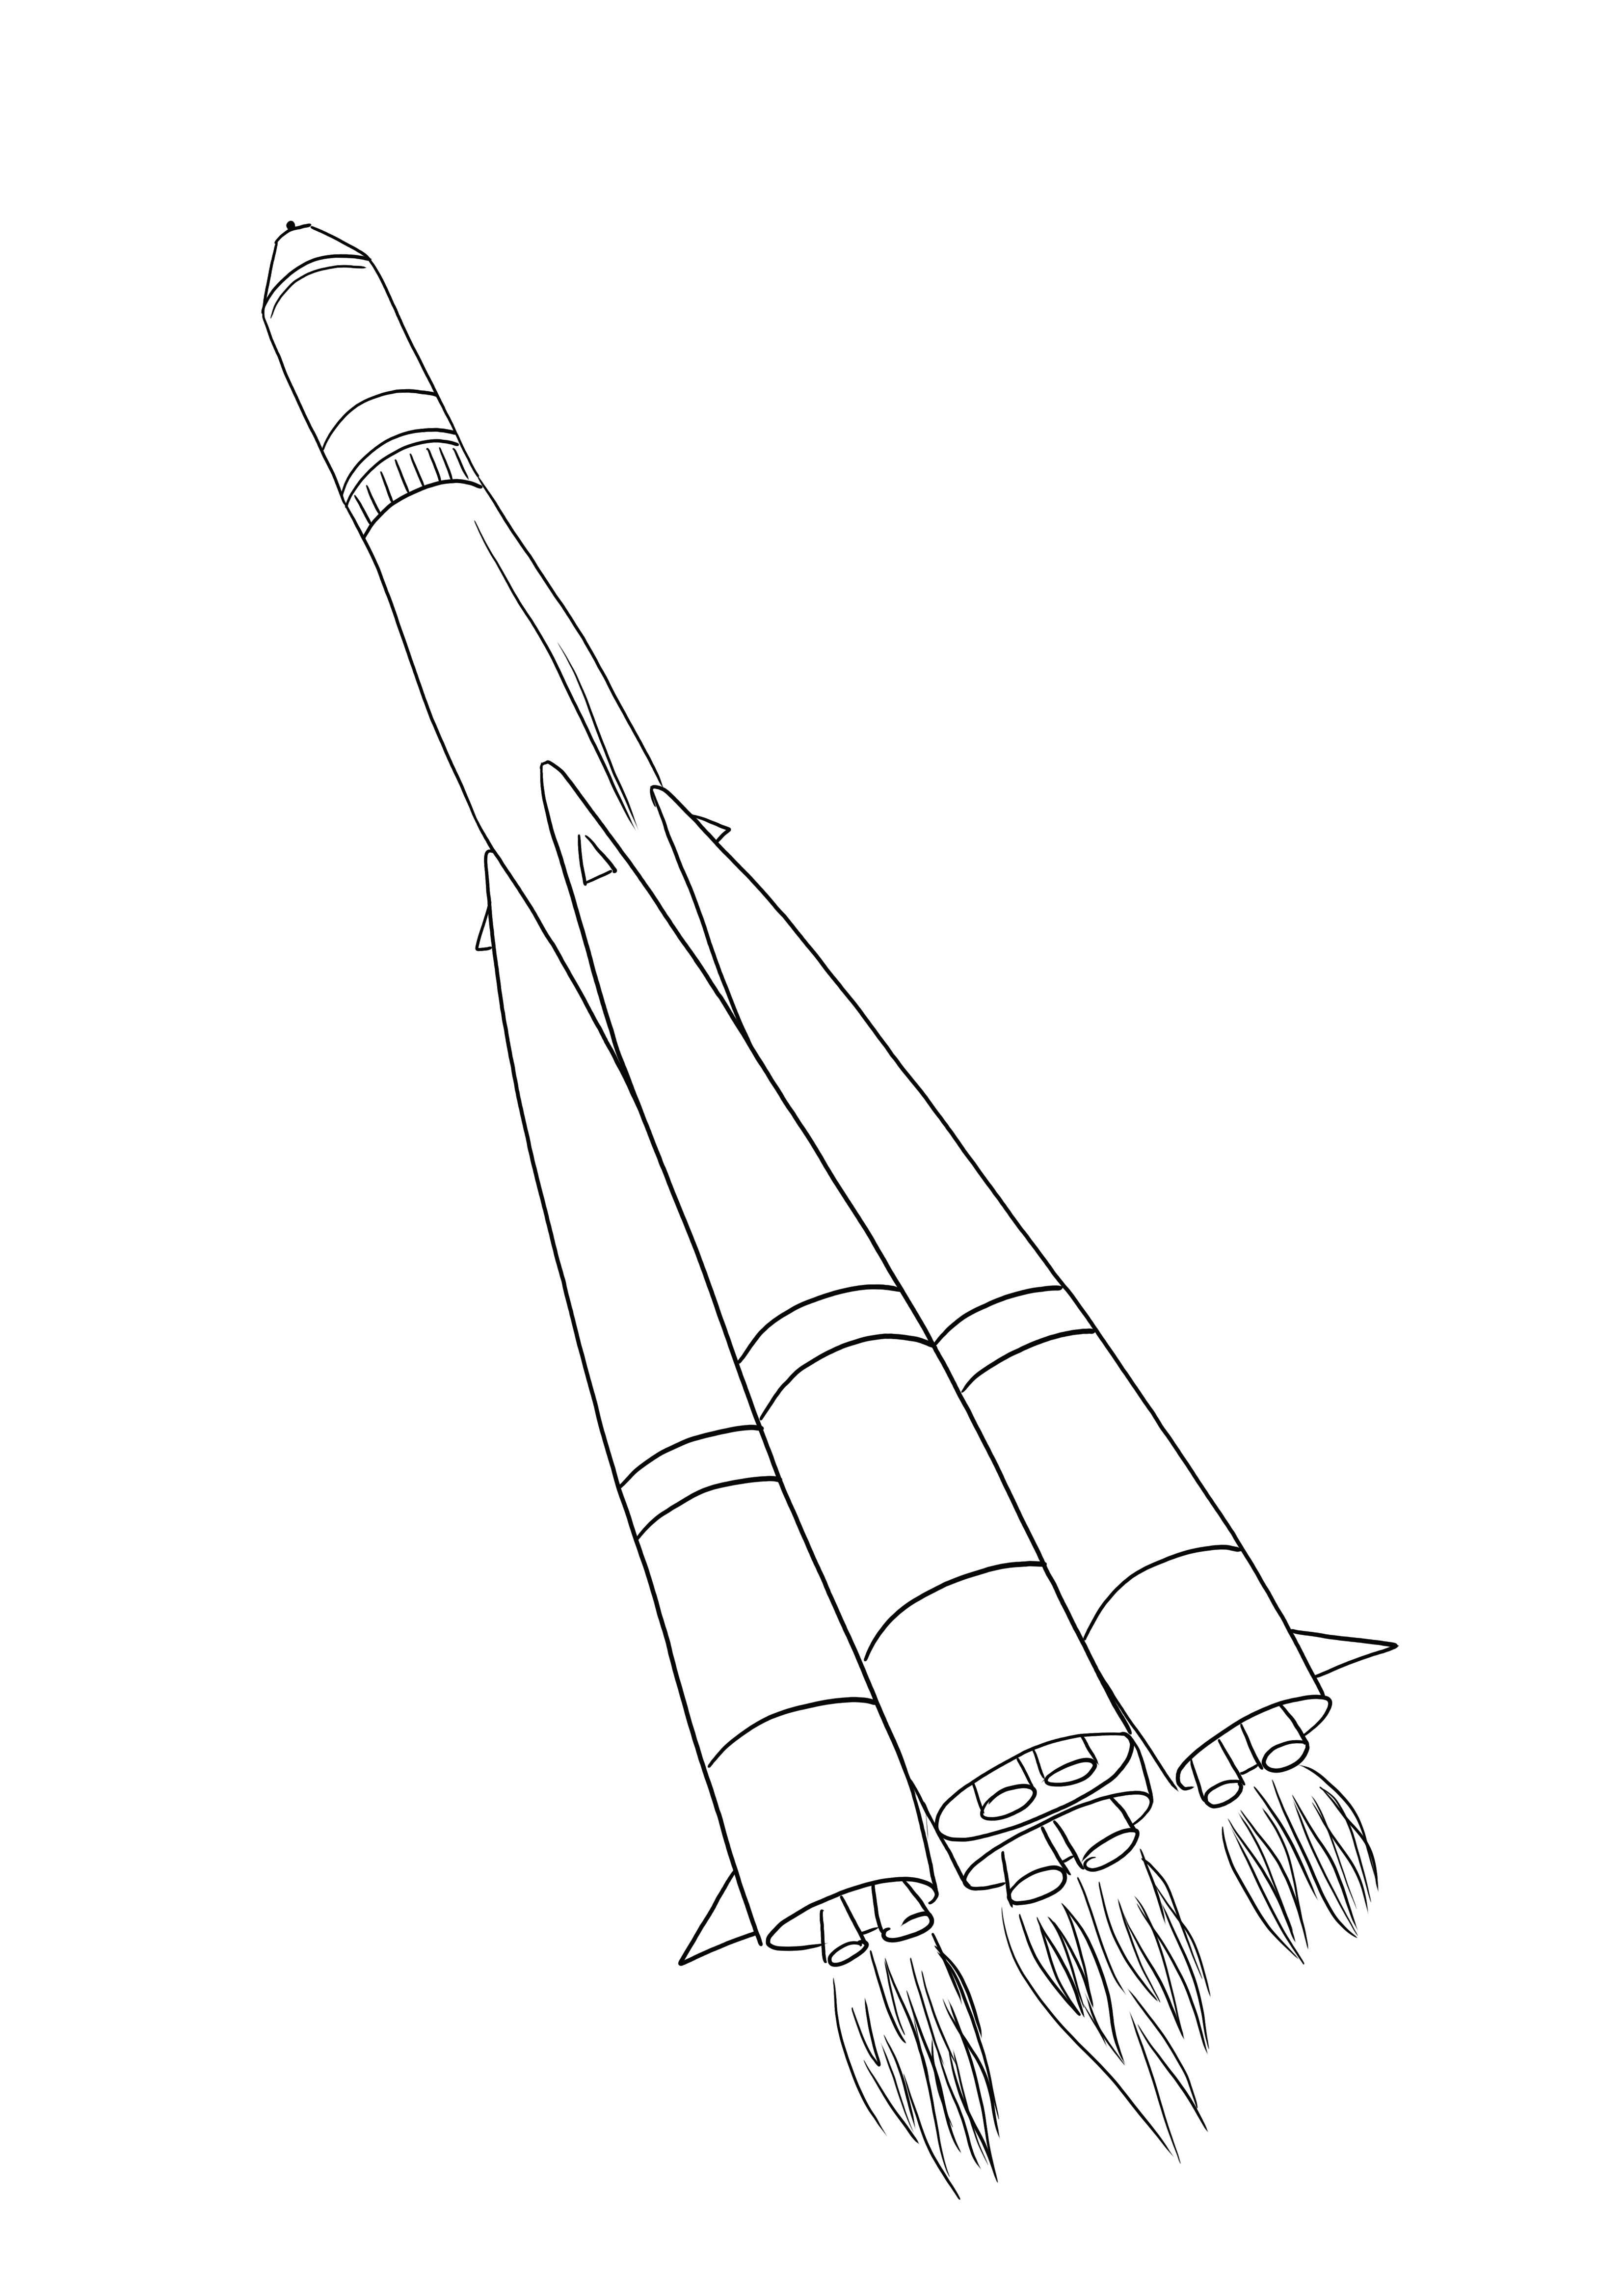 Big Space Rocket taking off to space is free to download and color for kids